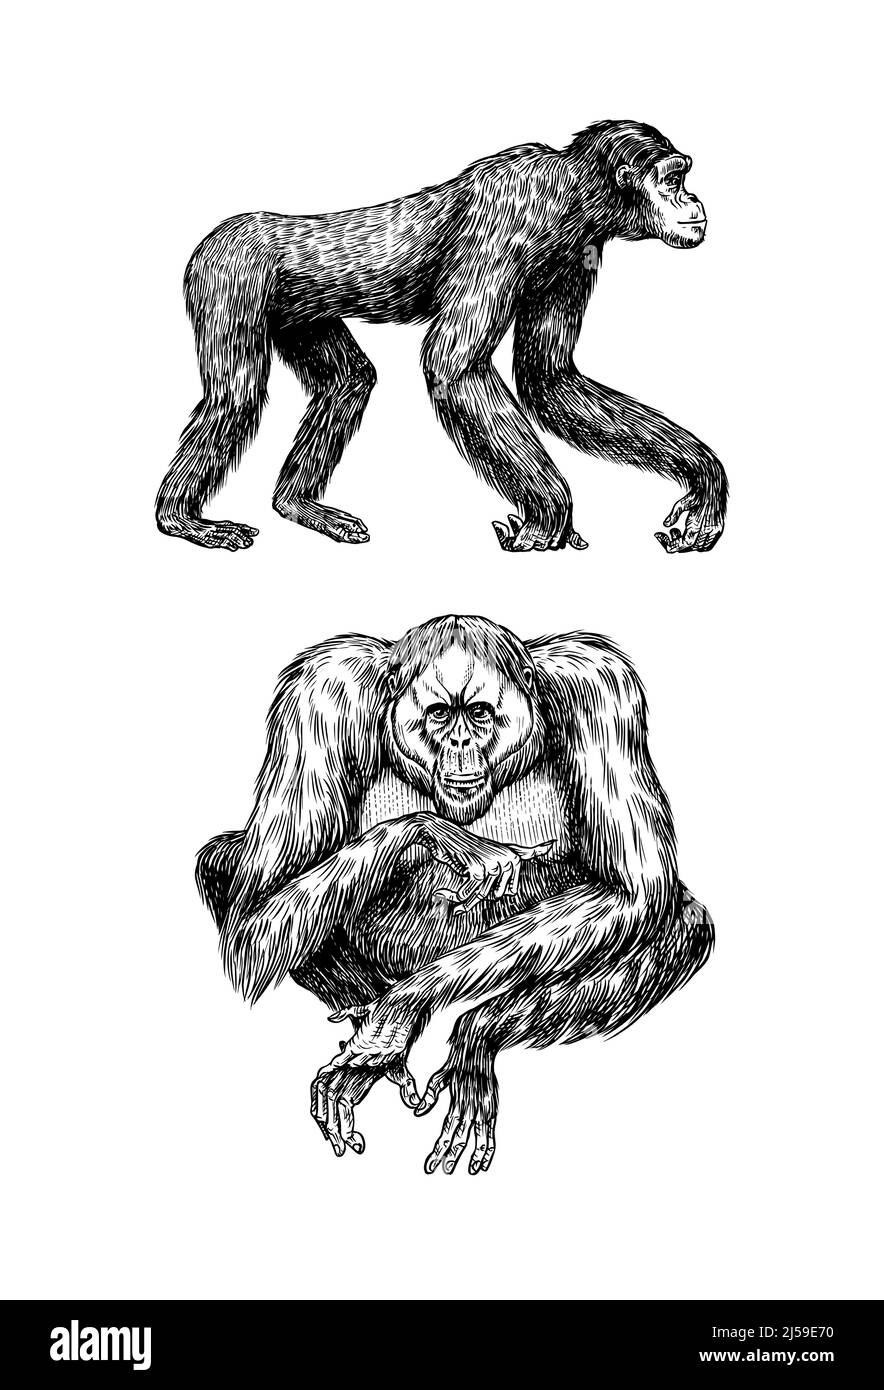 Orangutan and Bonobo or chimpanzee in vintage style. Hand drawn engraved sketch in woodcut style. Large intelligent animal with long hair. Stock Vector